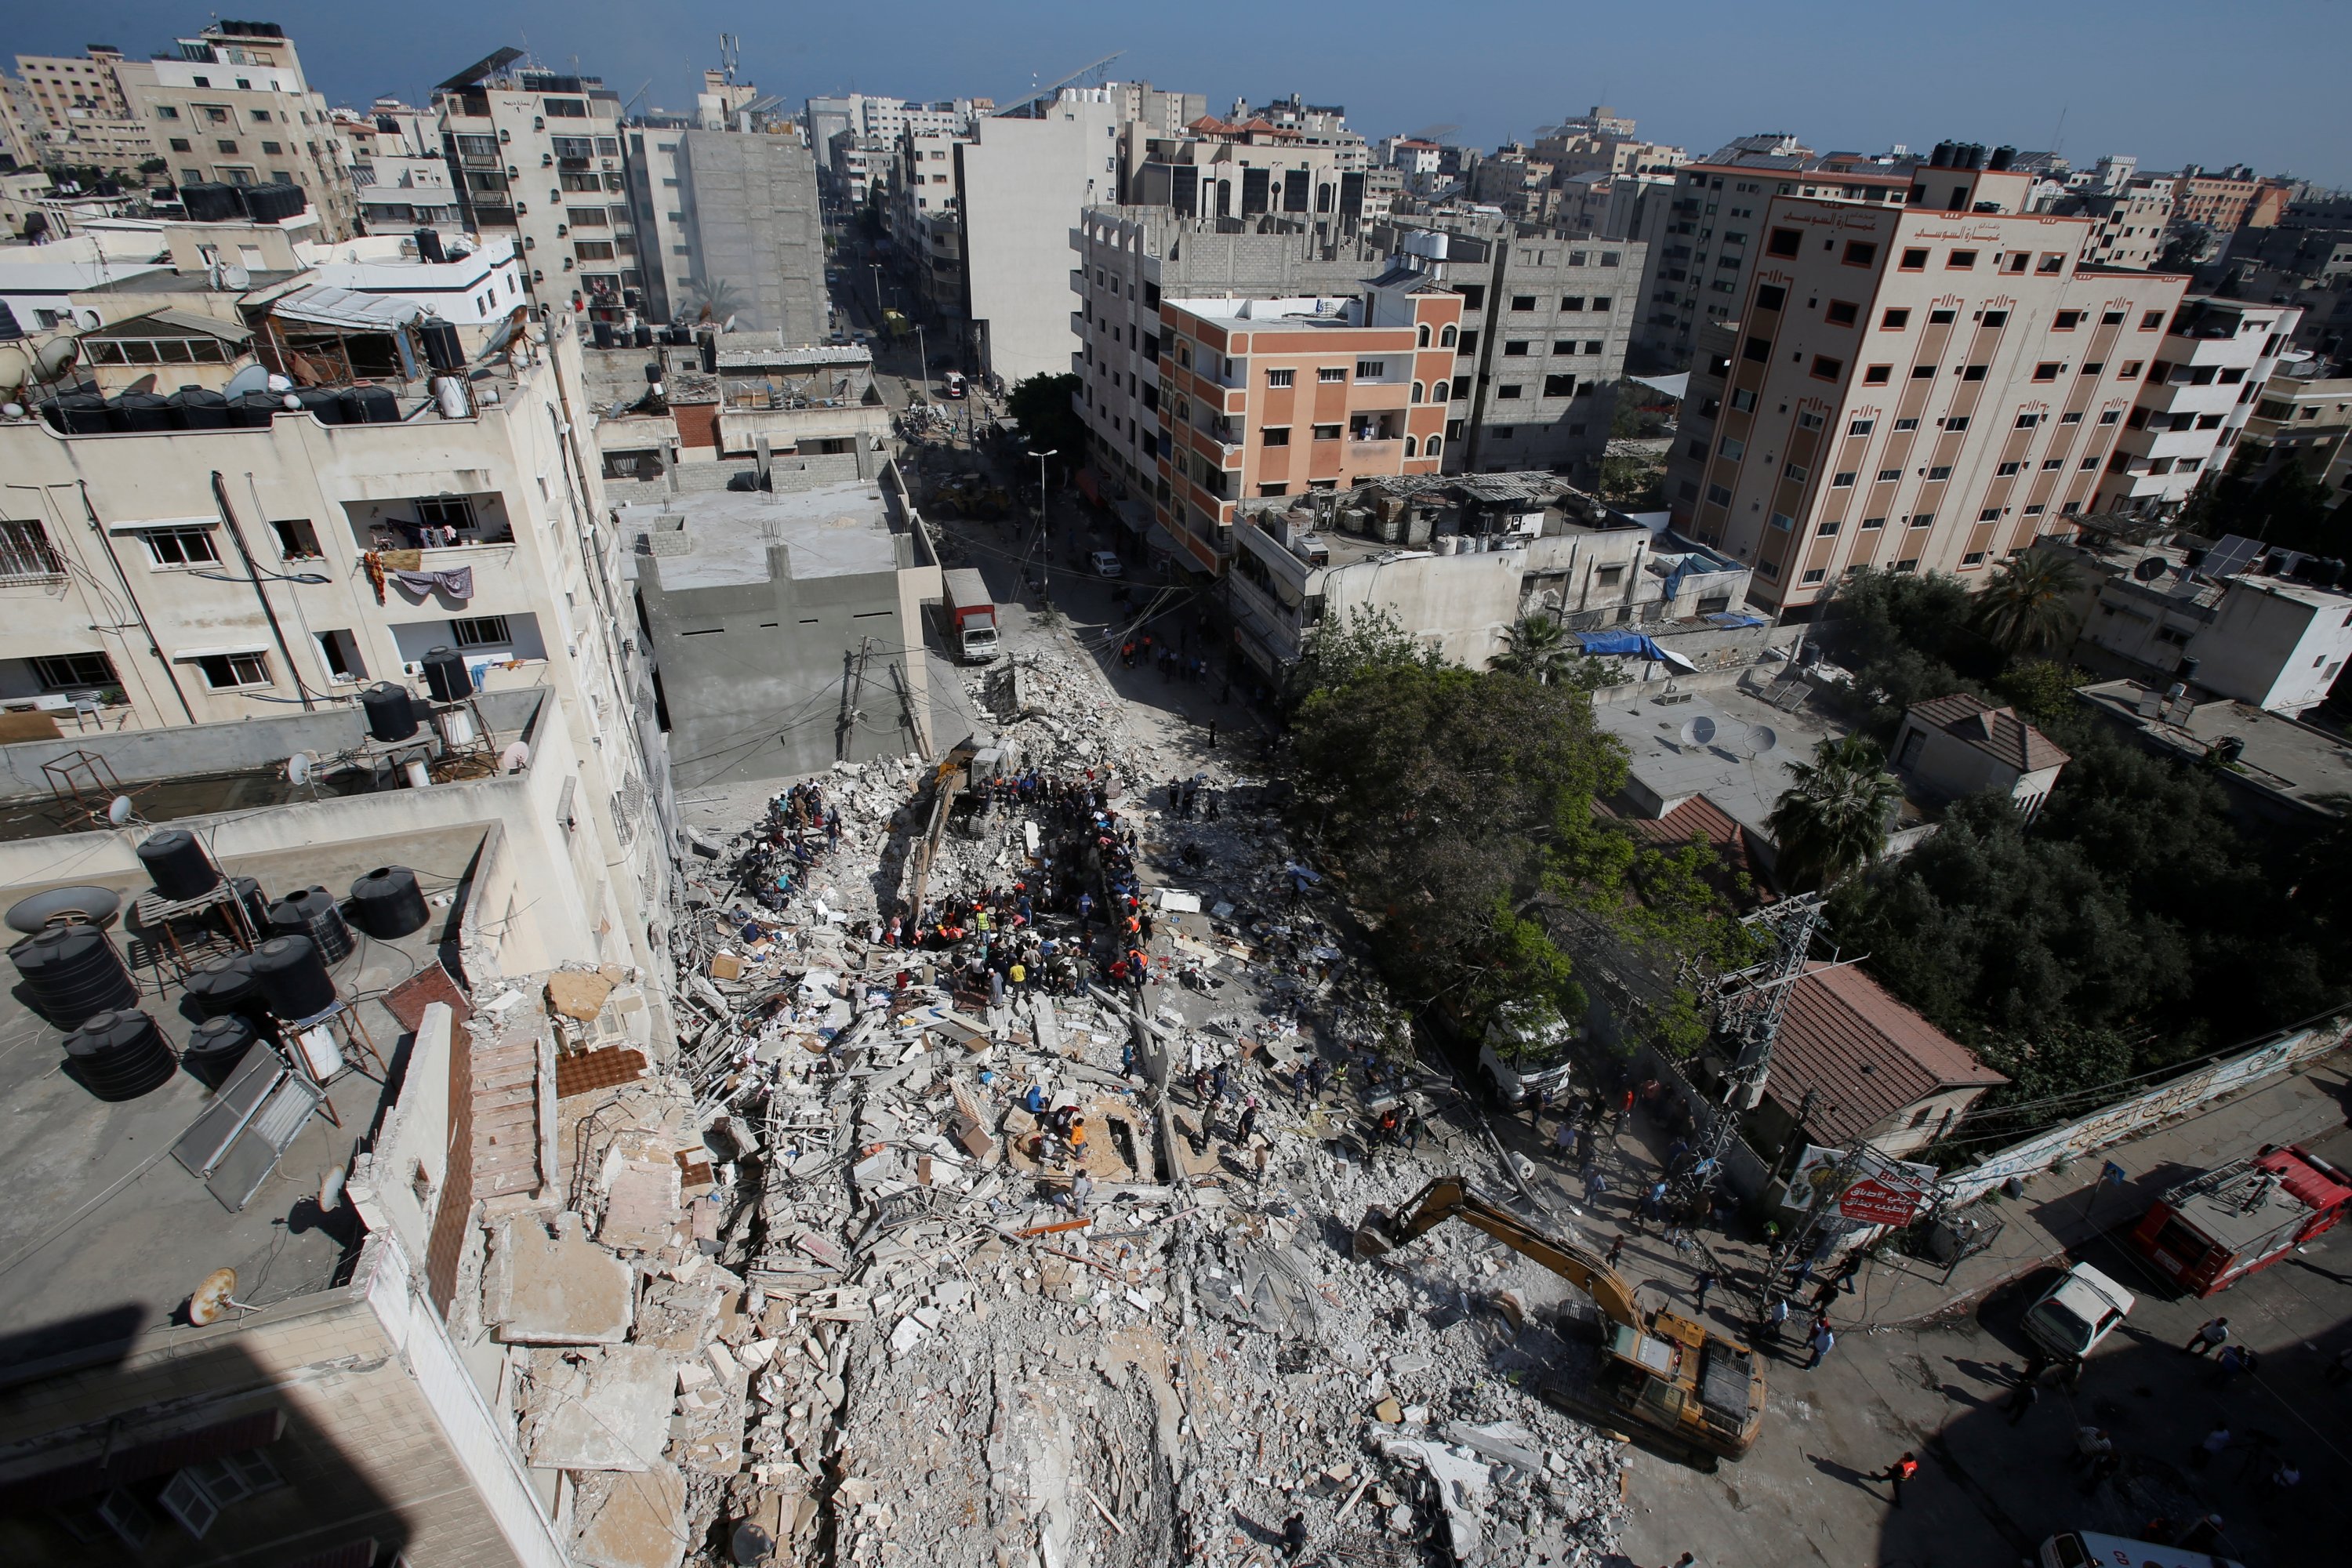 Rescuers search for people in the rubble of a building at the site of Israeli airstrikes, in Gaza City, May 16, 2021. (Reuters Photo)